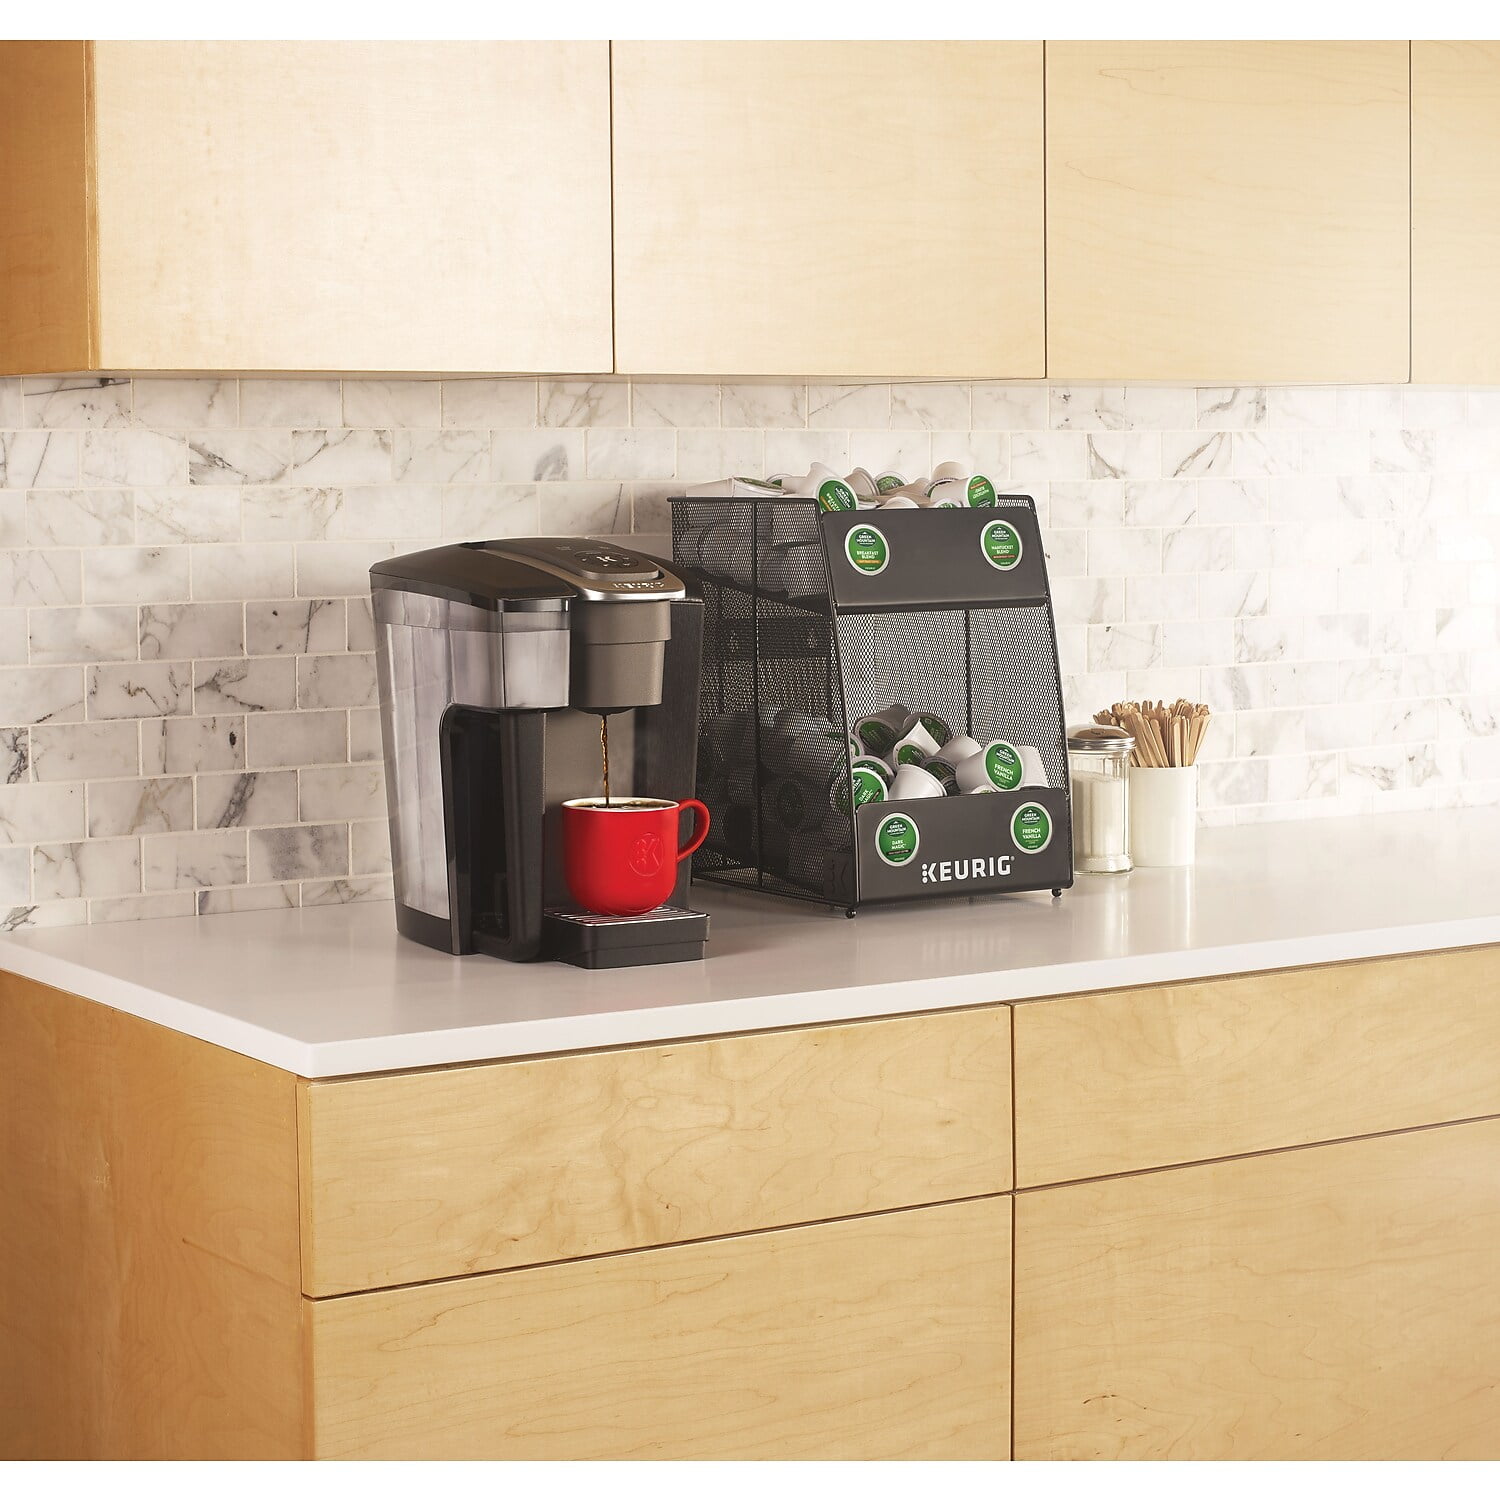 Quench 174 Keurig® Single-Cup Coffee Brewer